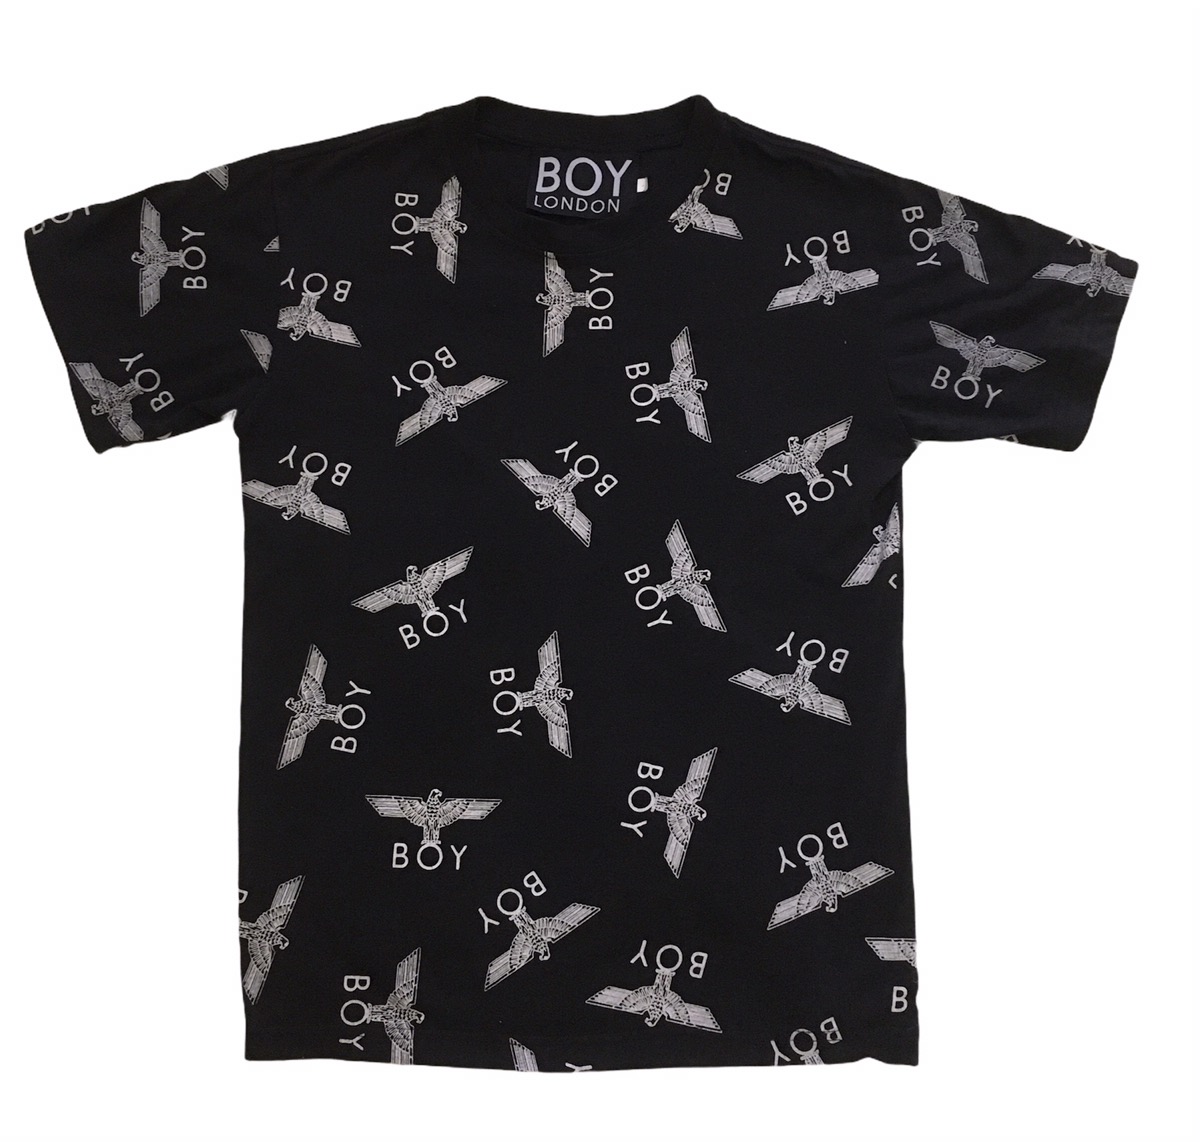 Other Designers Boy London - Boy London All Over Print Tee